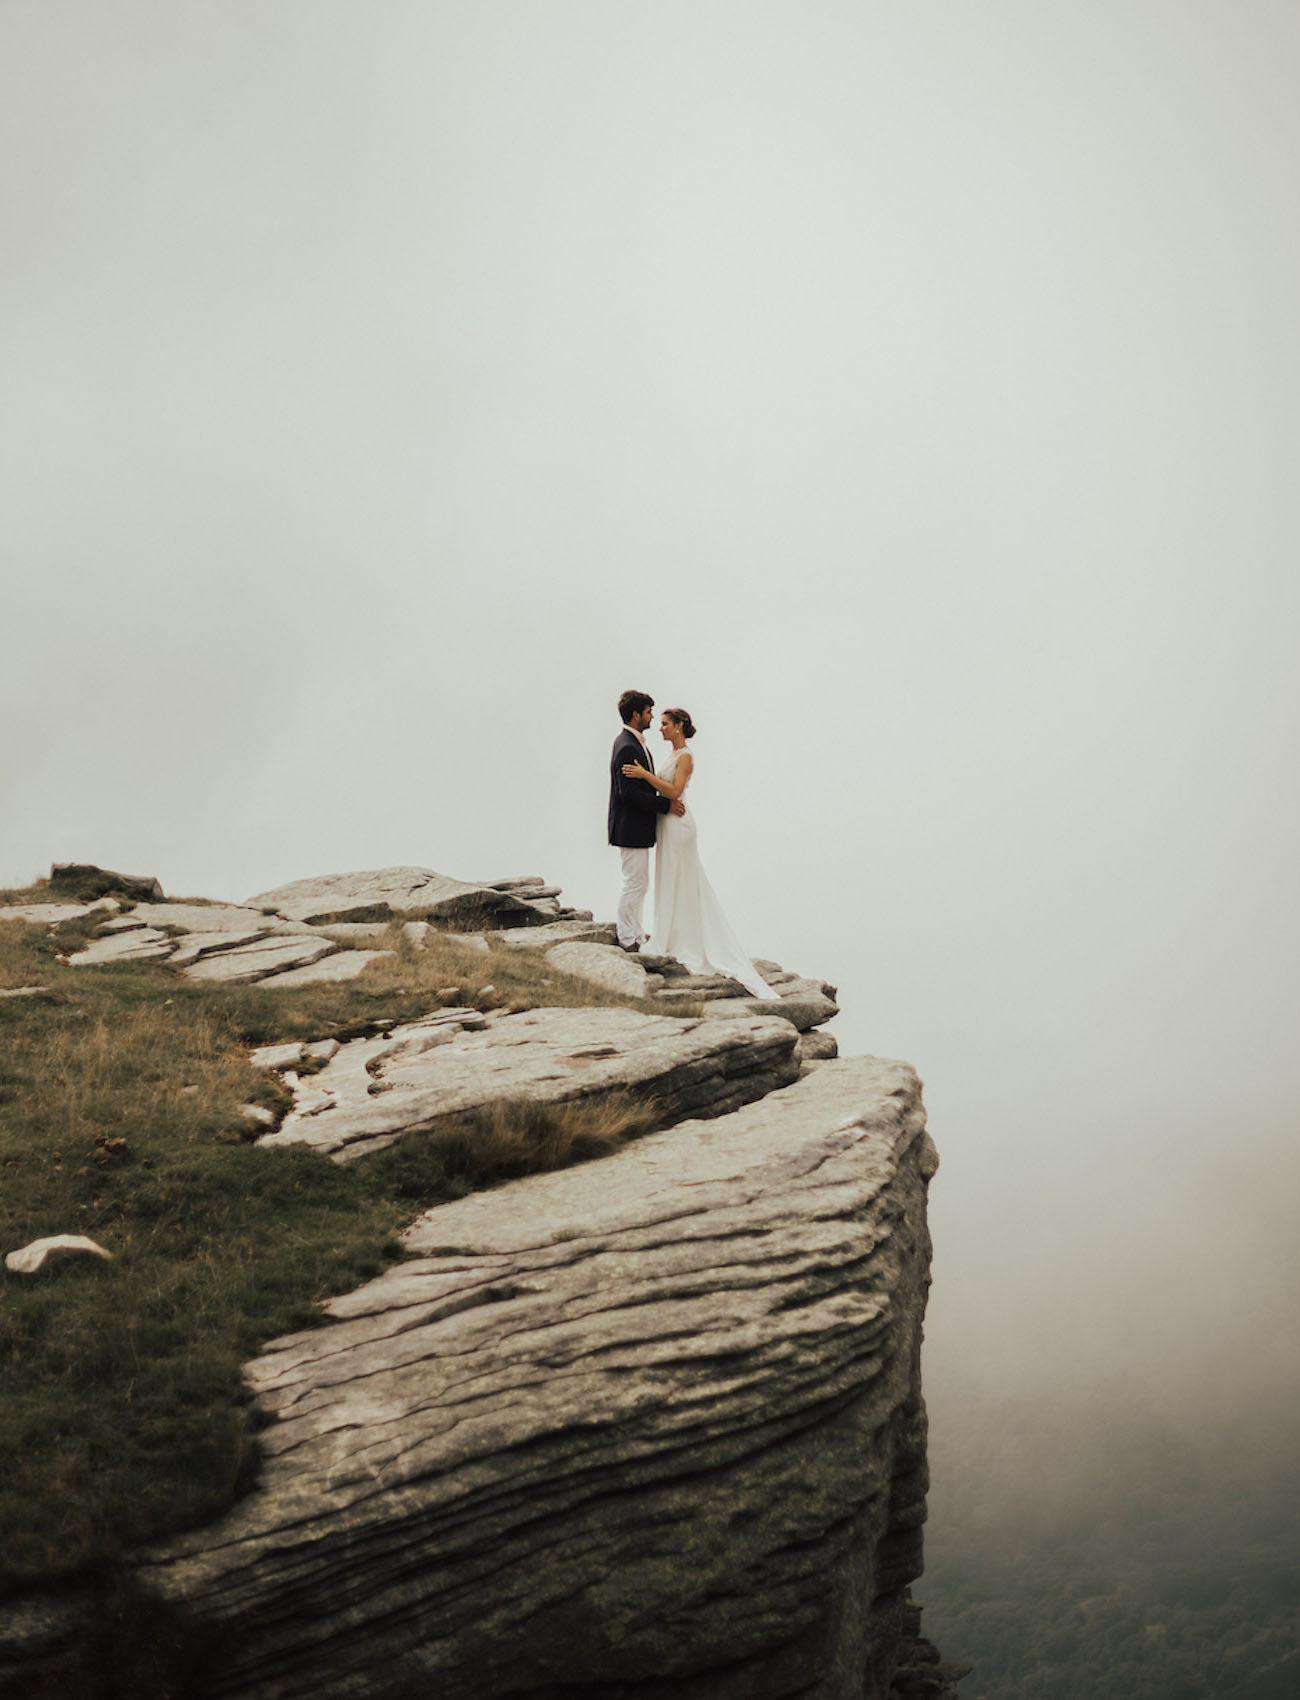 French Elopement in the Clouds